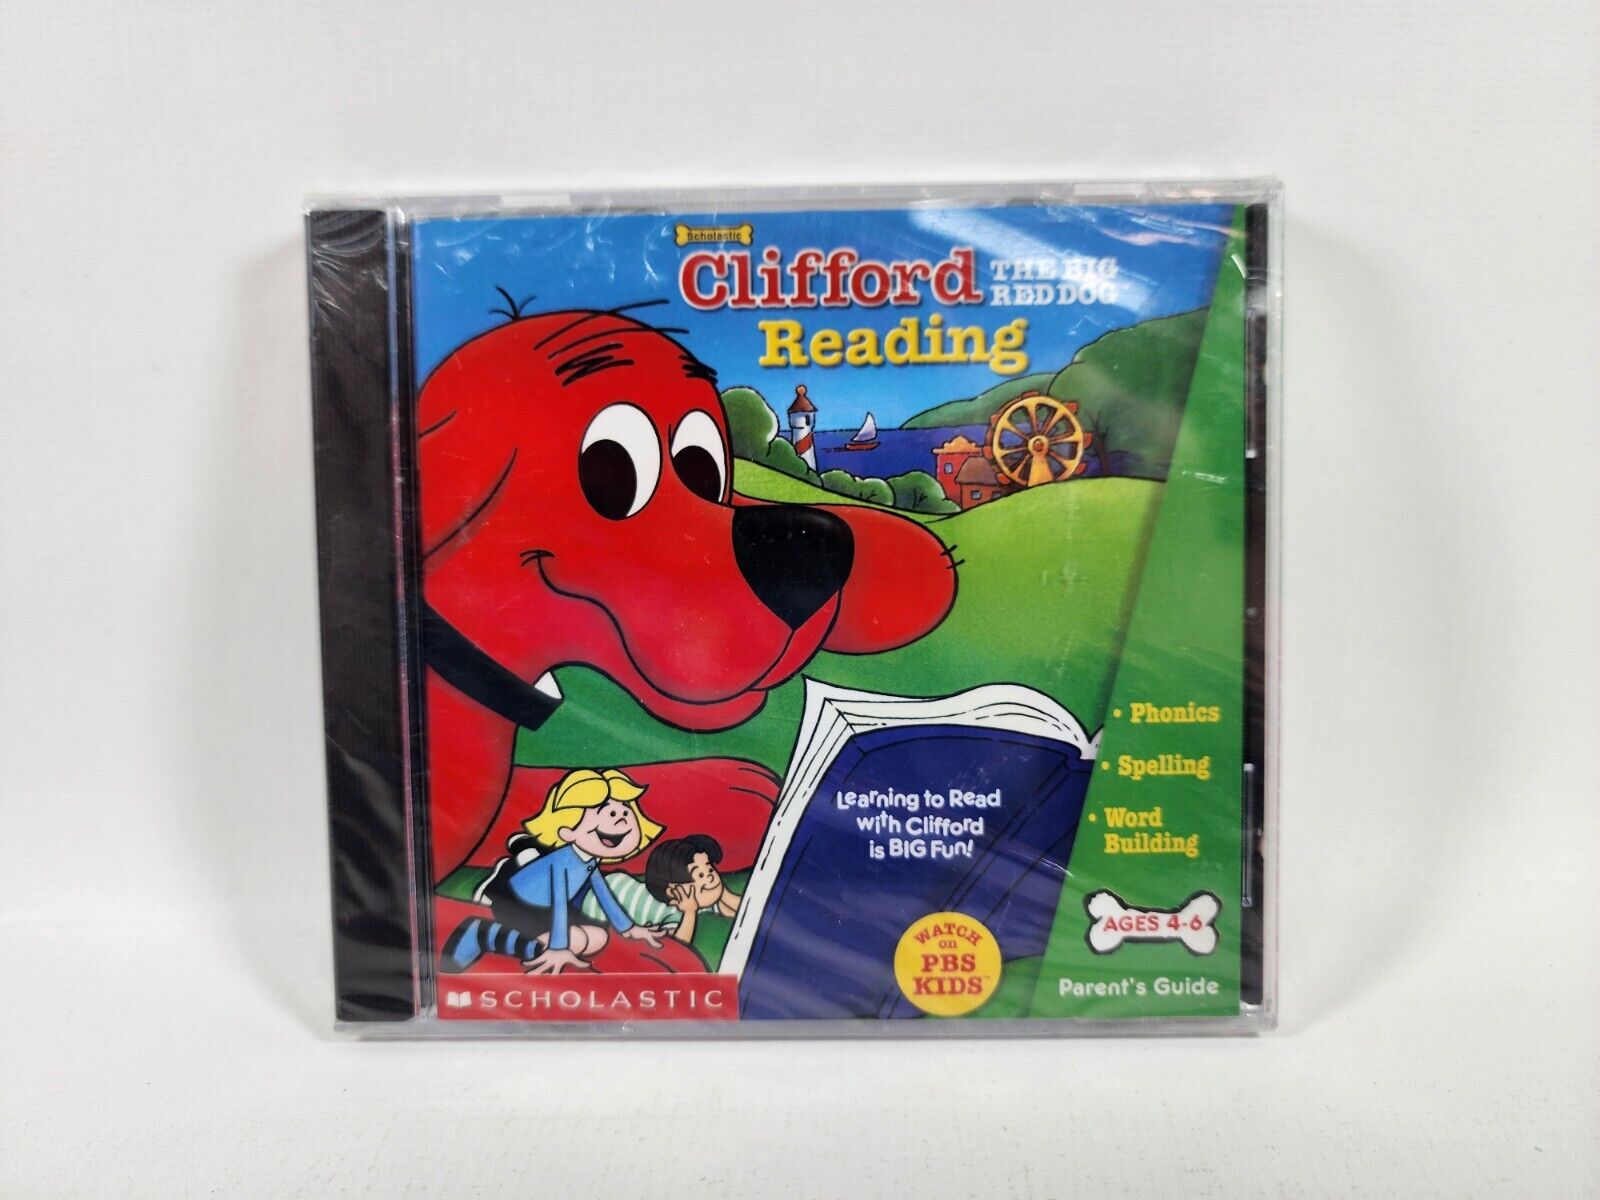 Scholastic Clifford The Big Red Dog Reading for PC or Mac Brand New Sealed